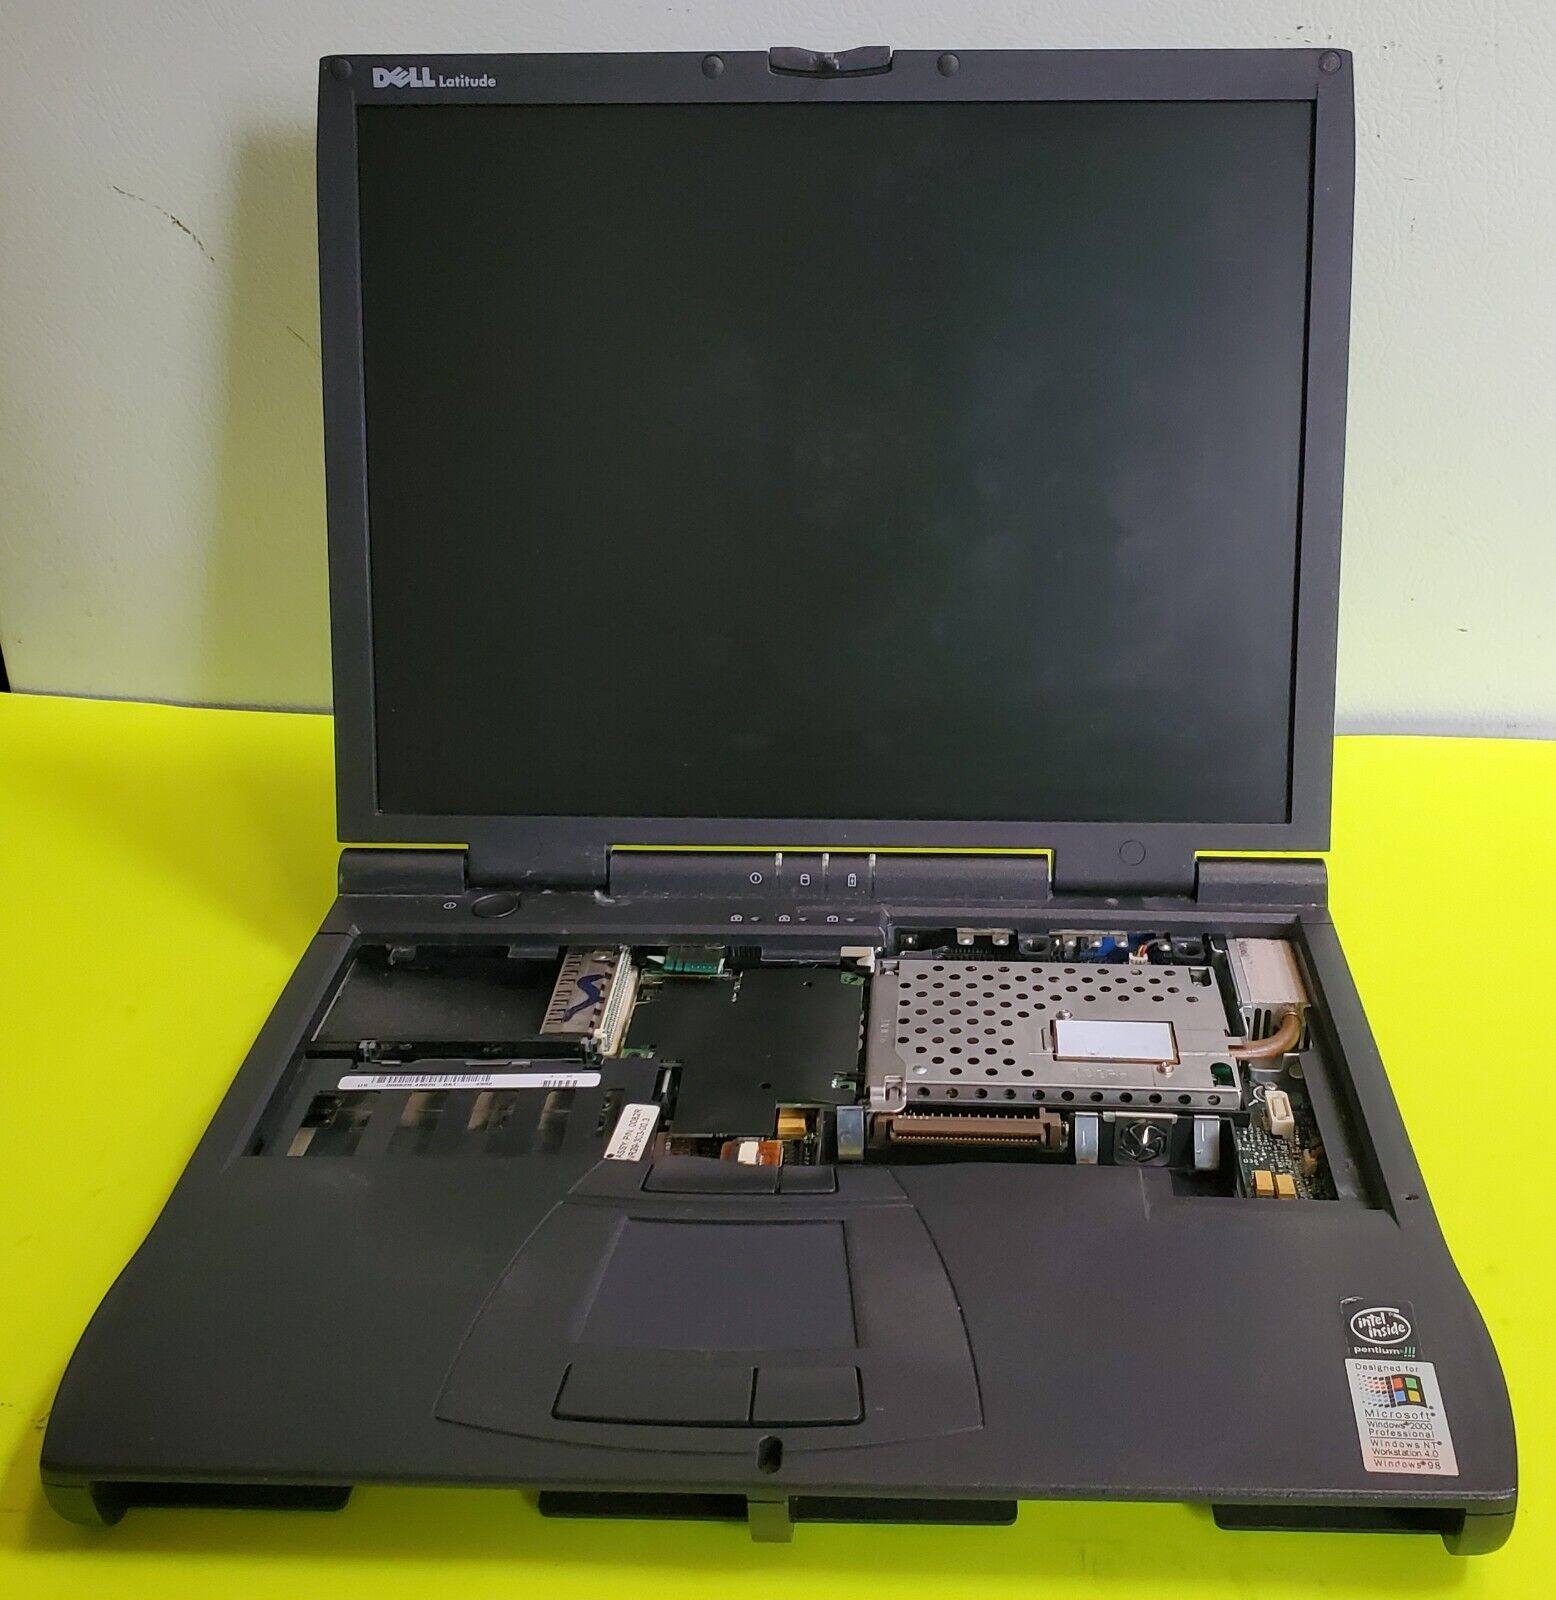 Dell Latitude CPx Model PPX Pentium III Vintage Laptop Computer - Sold AS IS